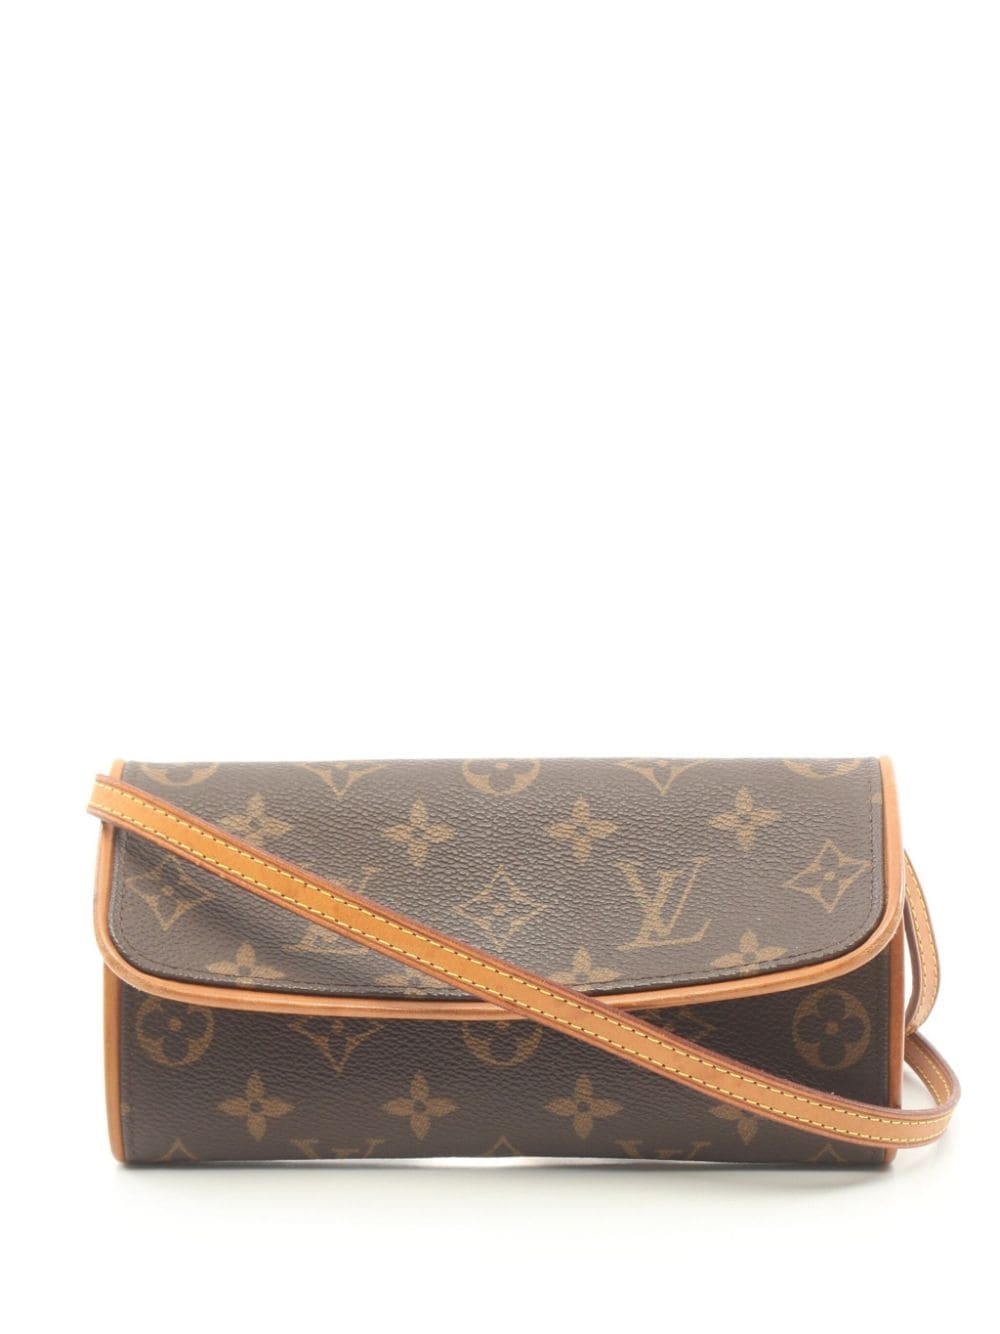 Pre-owned Louis Vuitton 2000 Twin Pm Shoulder Bag In Brown